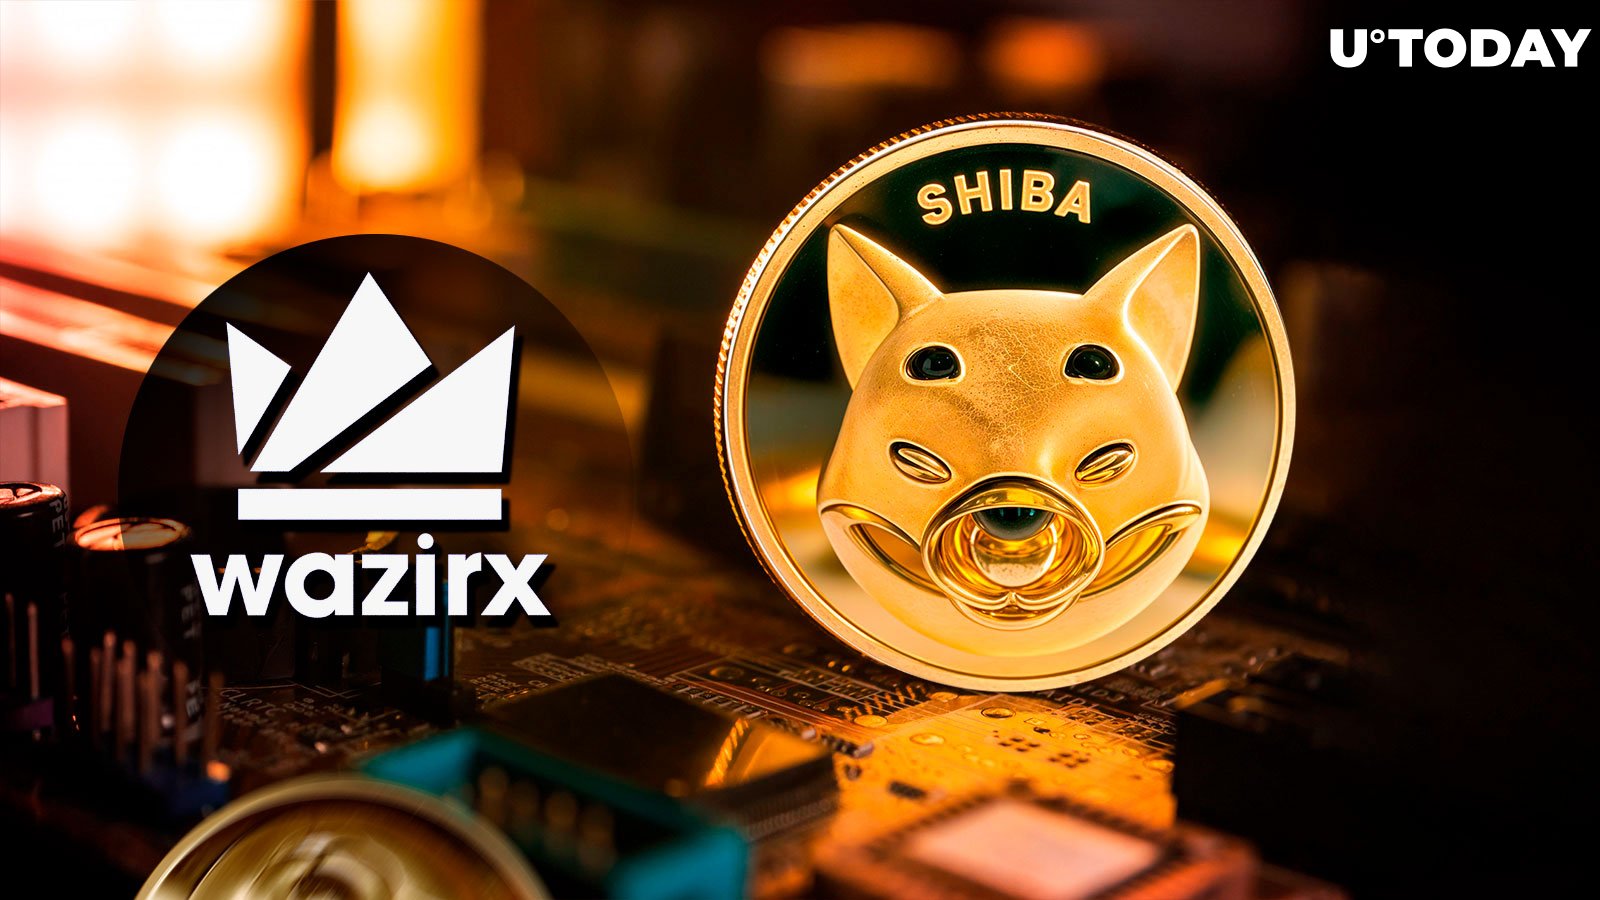 SHIB Price Surges as WarizX Hacker Sells All Tokens